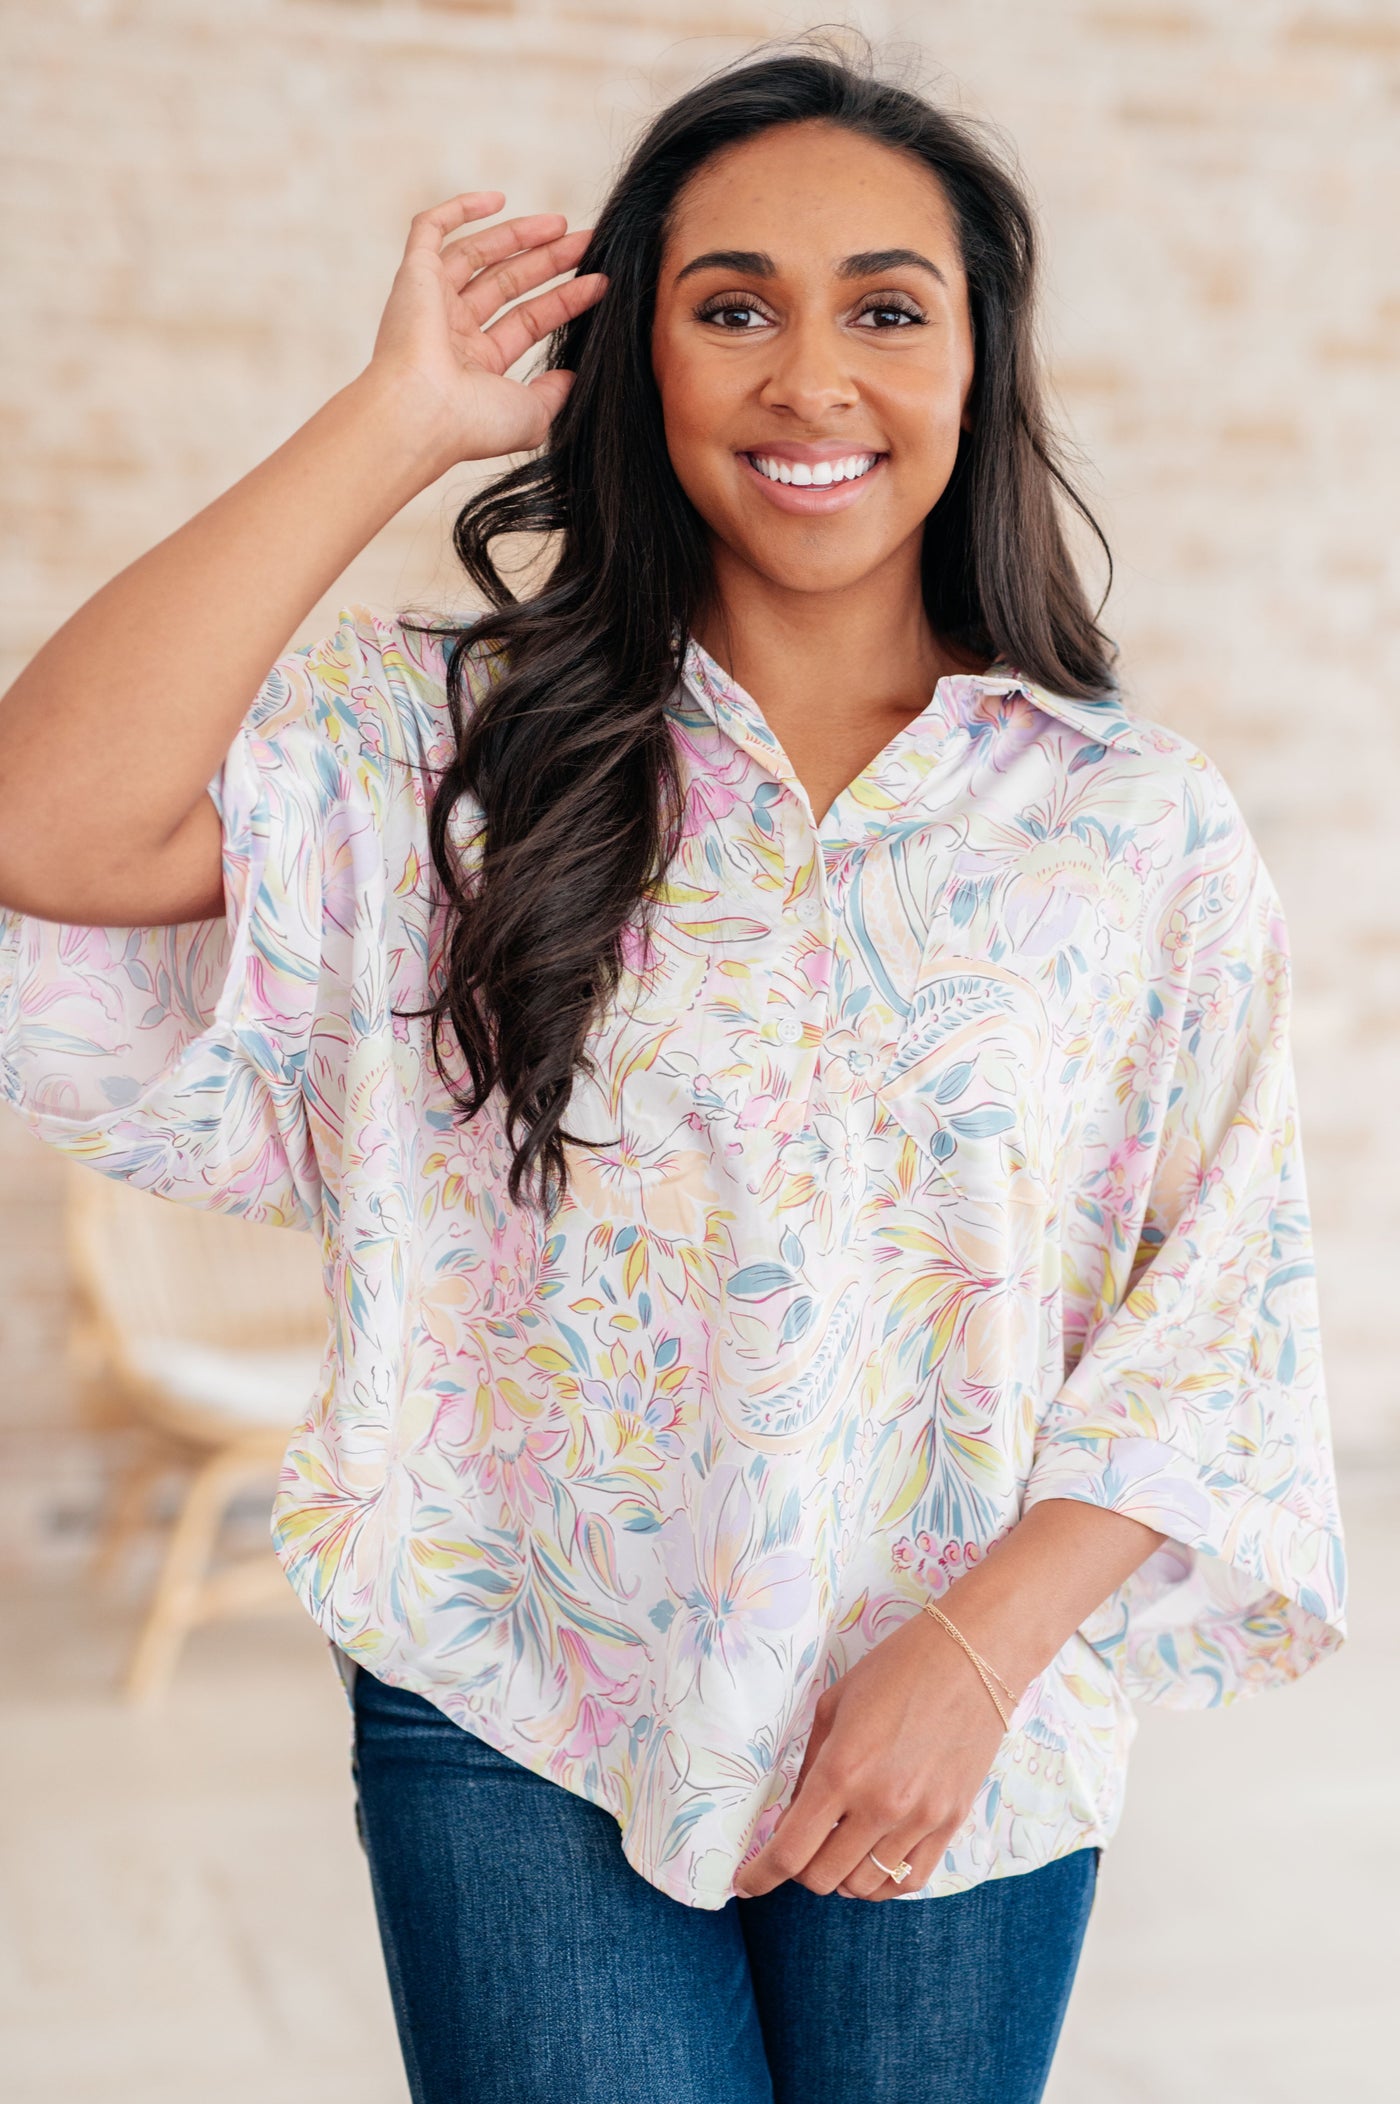 Made with lush Poly Satin, this blouse features a collared neckline, half front button closures, and a playful bat wing design. Complete with a patch pocket, banded sleeve cuffs, and a high-low scooped hem.